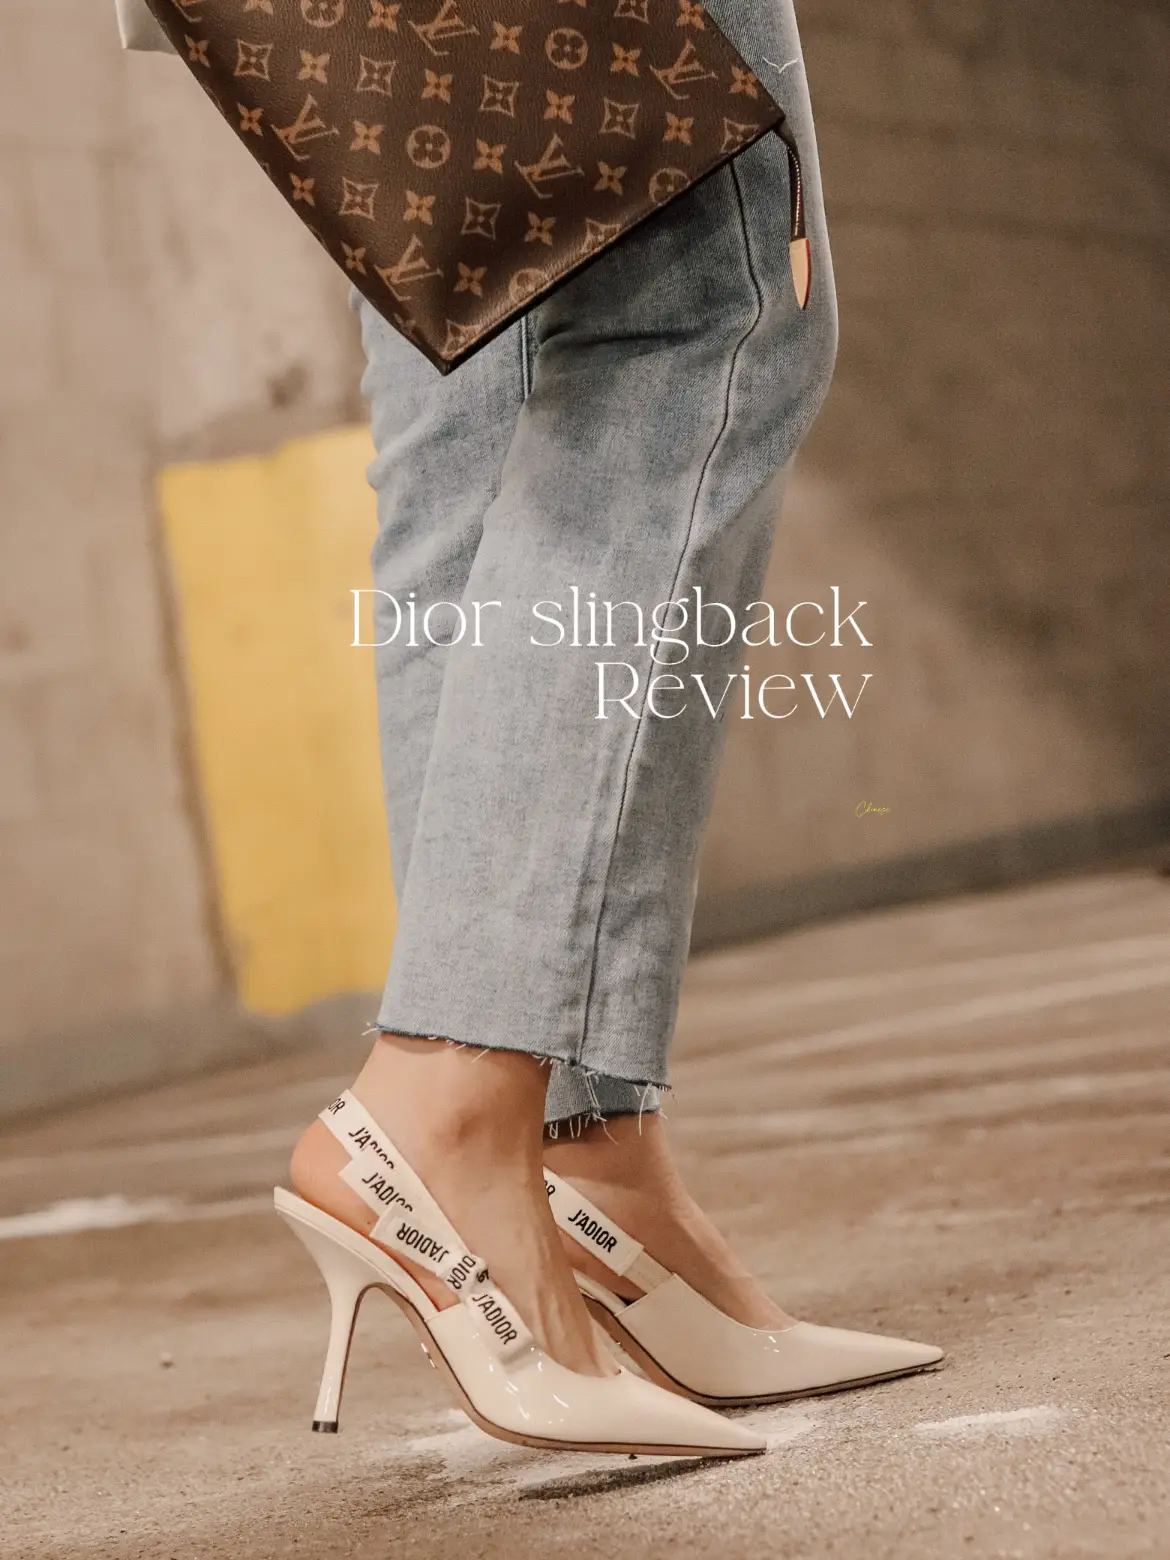 Dior Slingback Review, Gallery posted by DanielleHabash